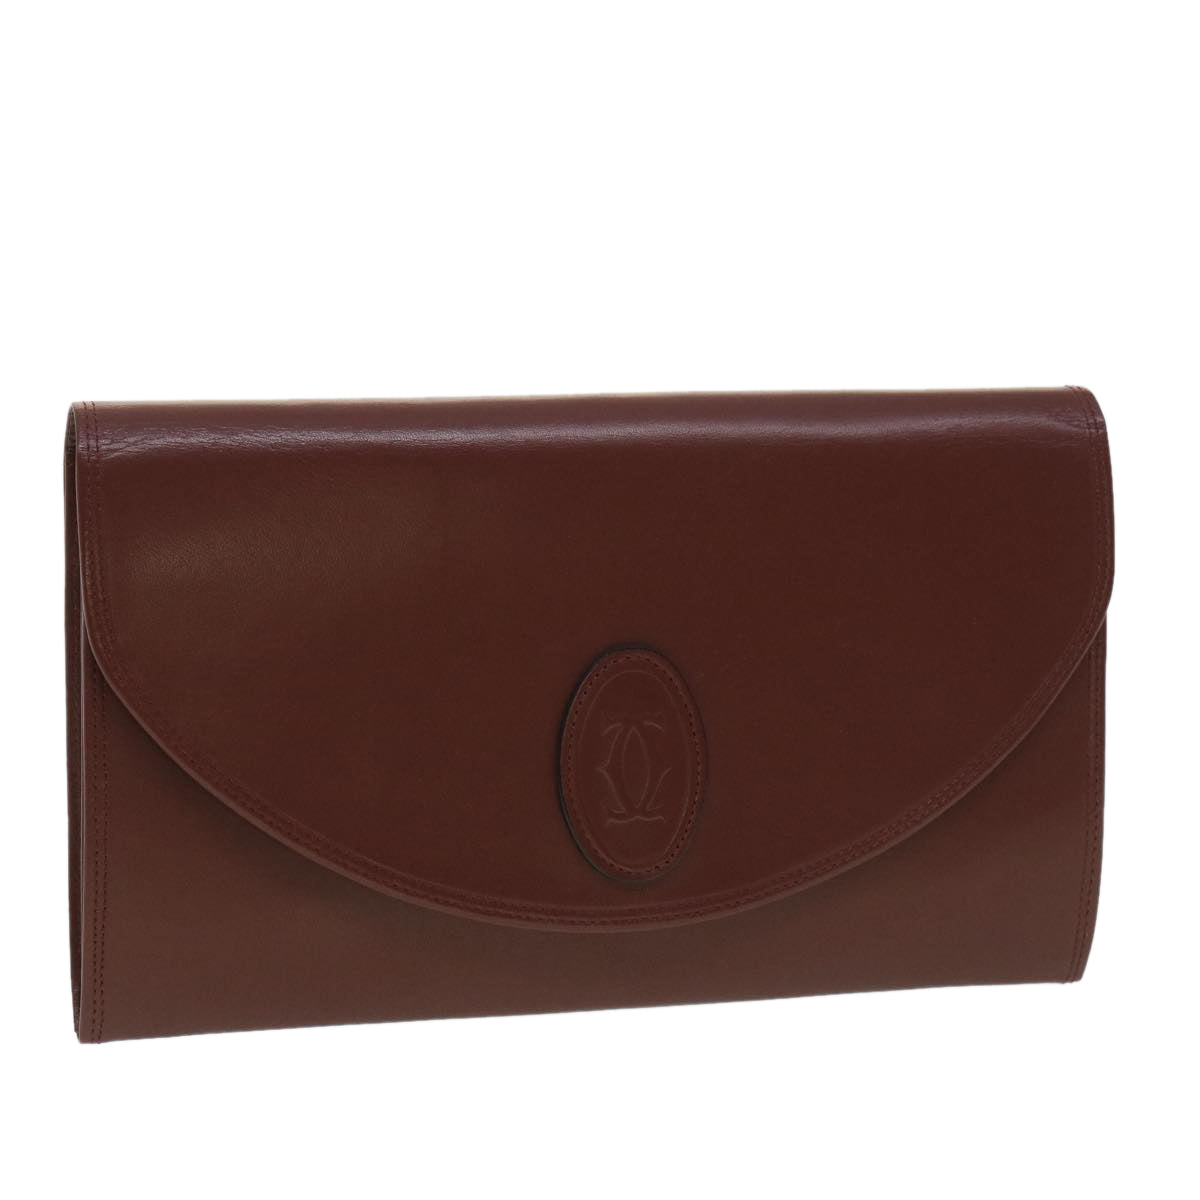 CARTIER Clutch Bag Leather Wine Red Auth 35722